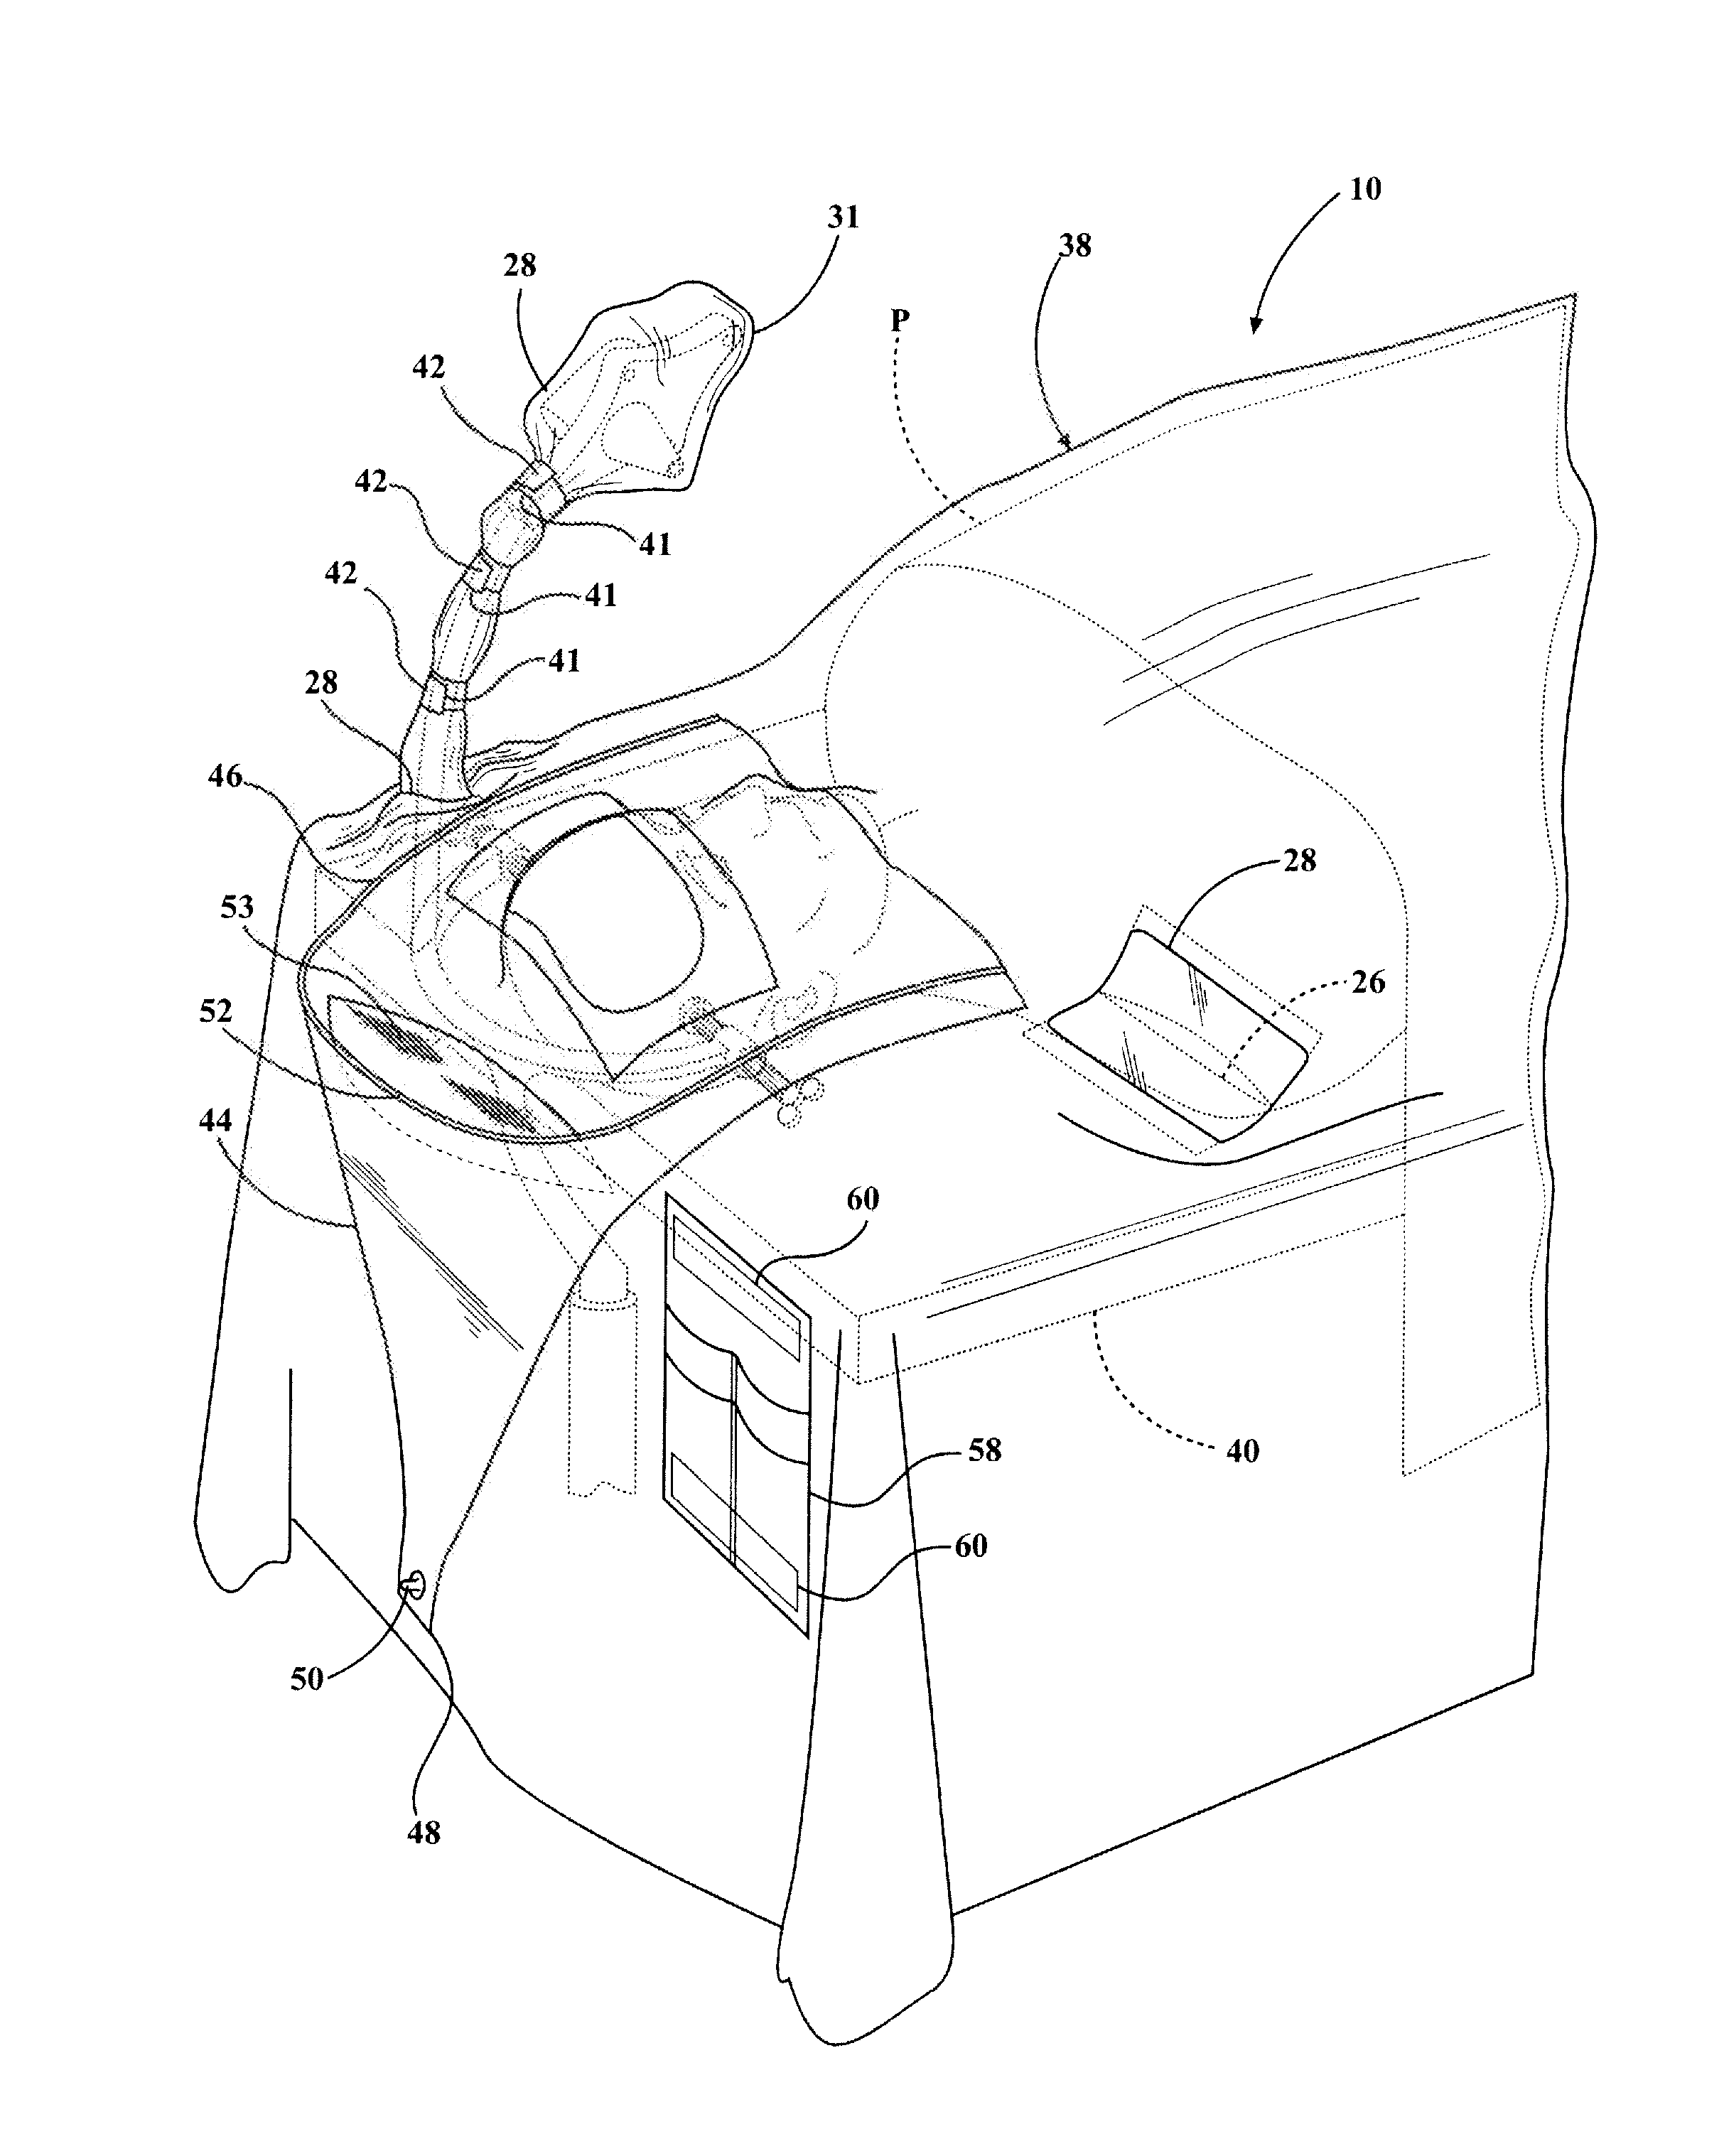 Craniotomy Drape and Method of Simultaneously Draping a Sterile Barrier Over a Patient and Navigation Tracker